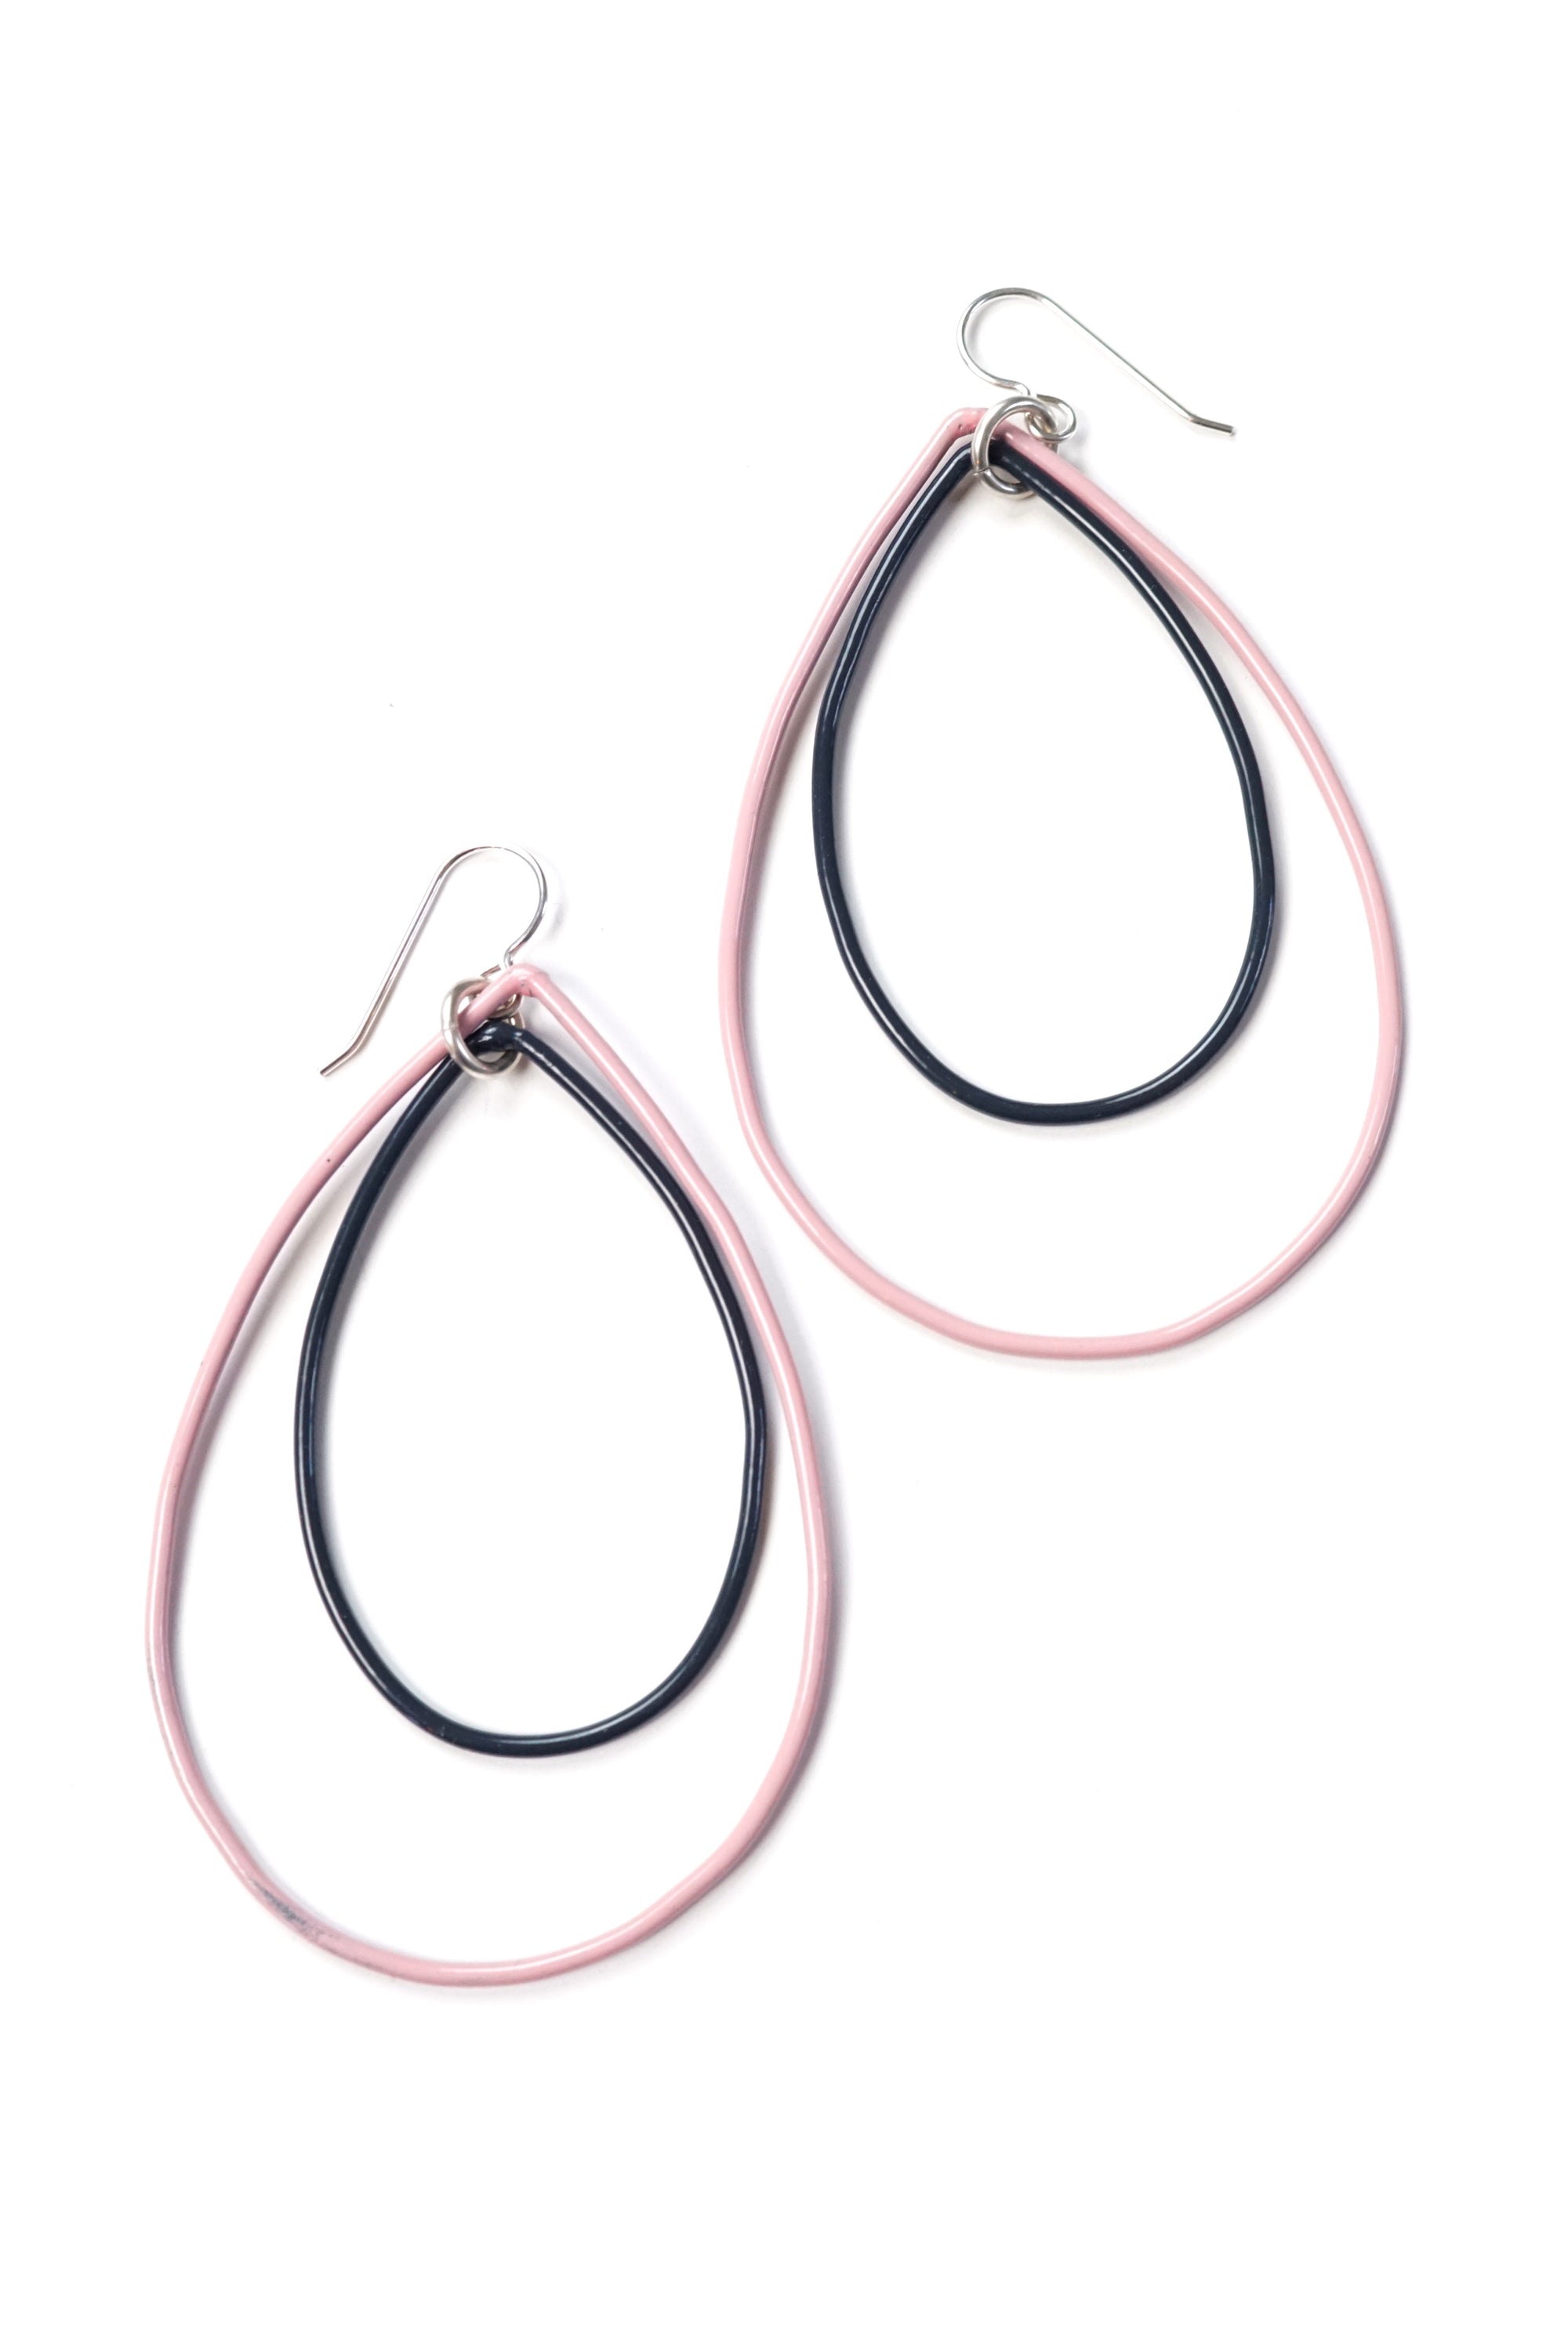 Large Eva earrings in Bubble Gum and Midnight Grey